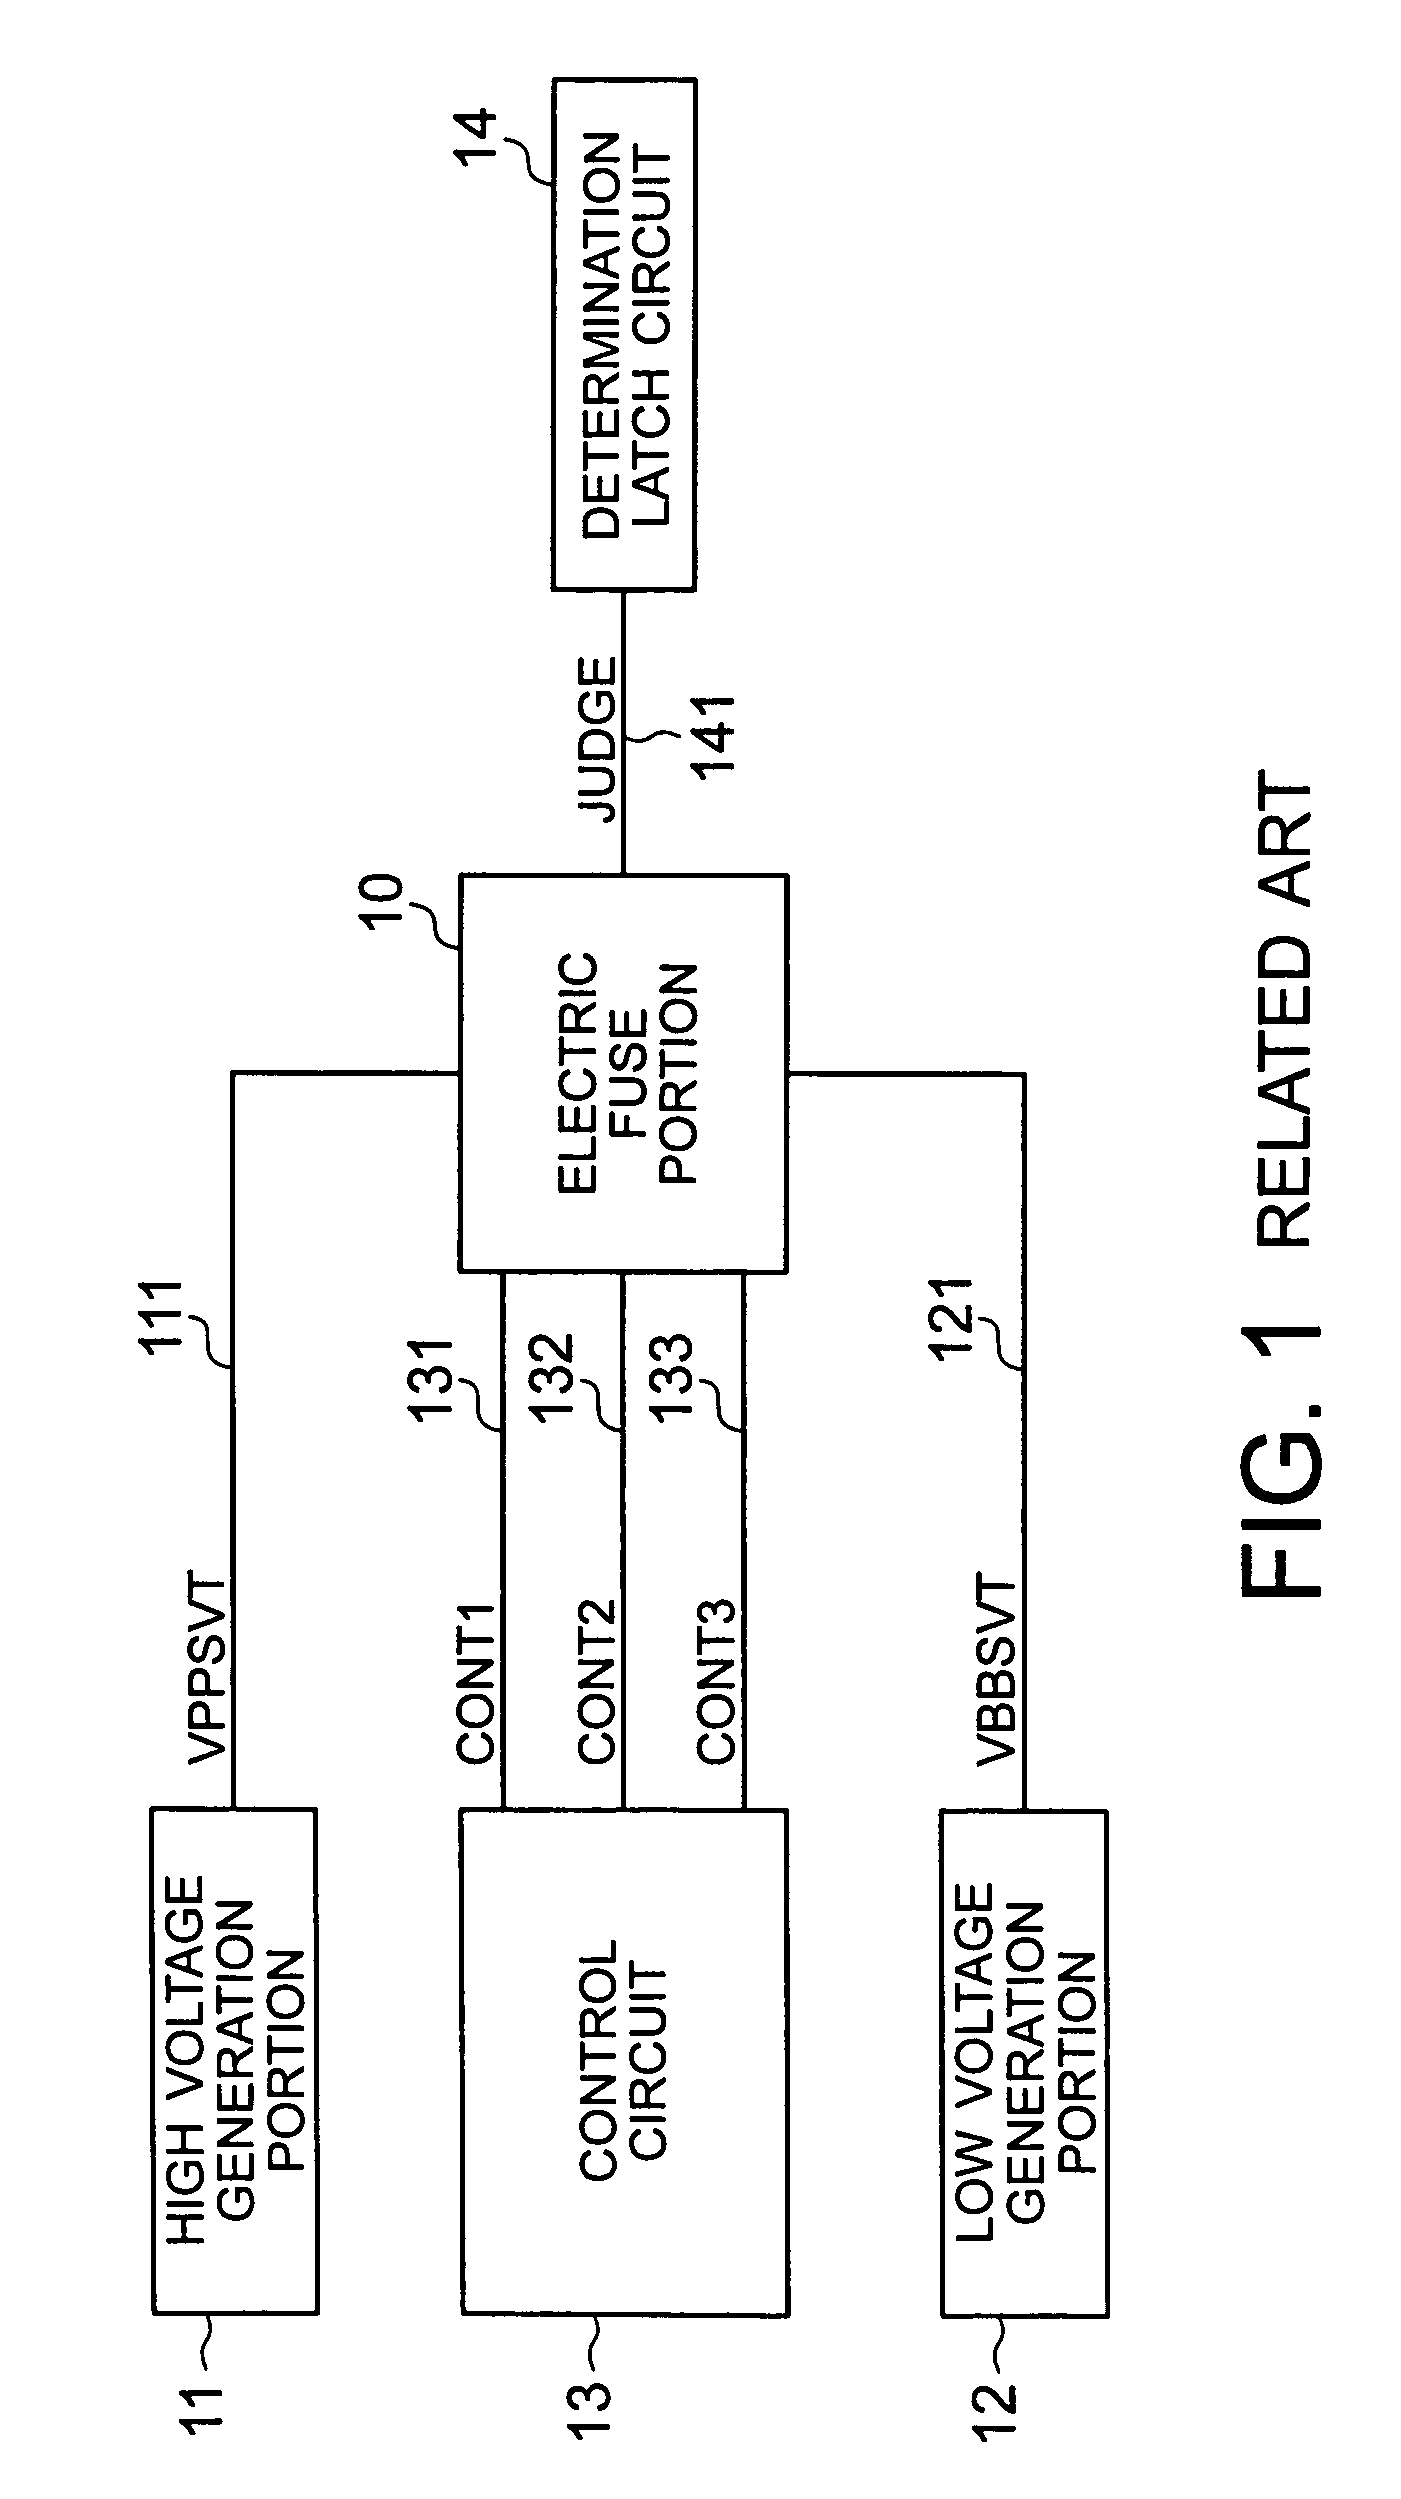 Semiconductor device having two fuses in parallel